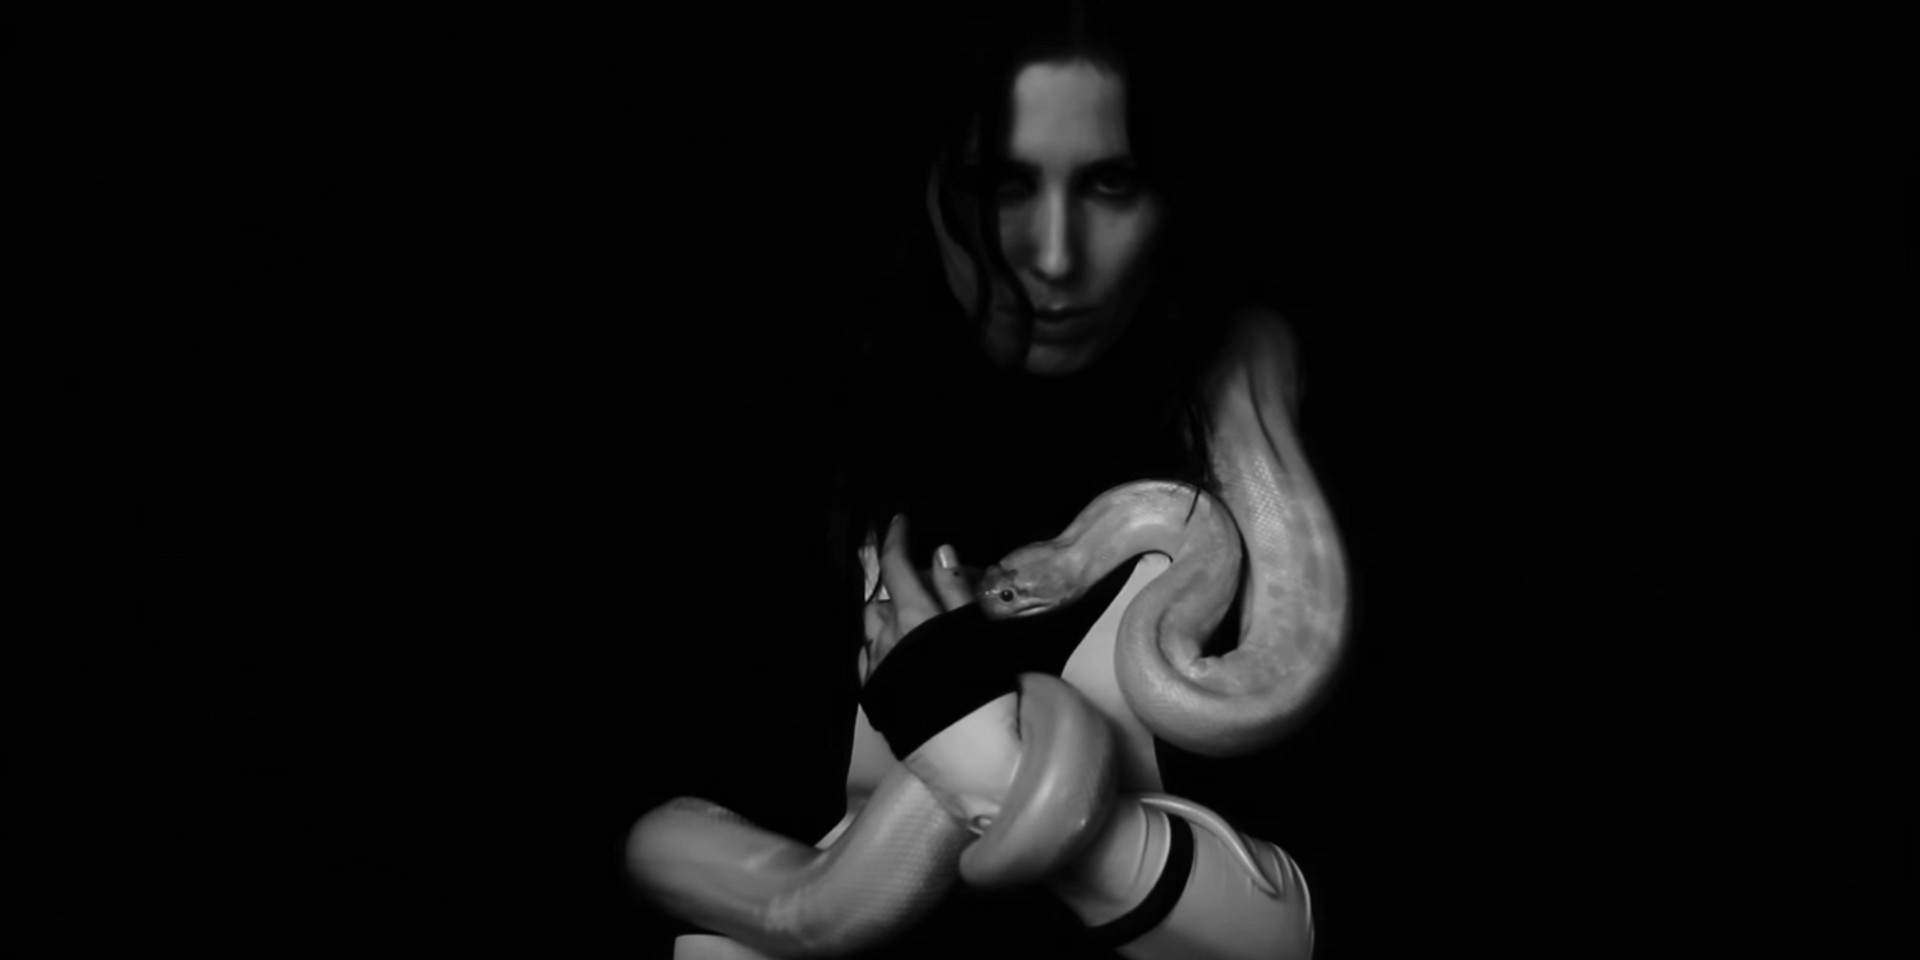 WATCH: Chelsea Wolfe conjures unnerving static and snakes in 'Hypnos'